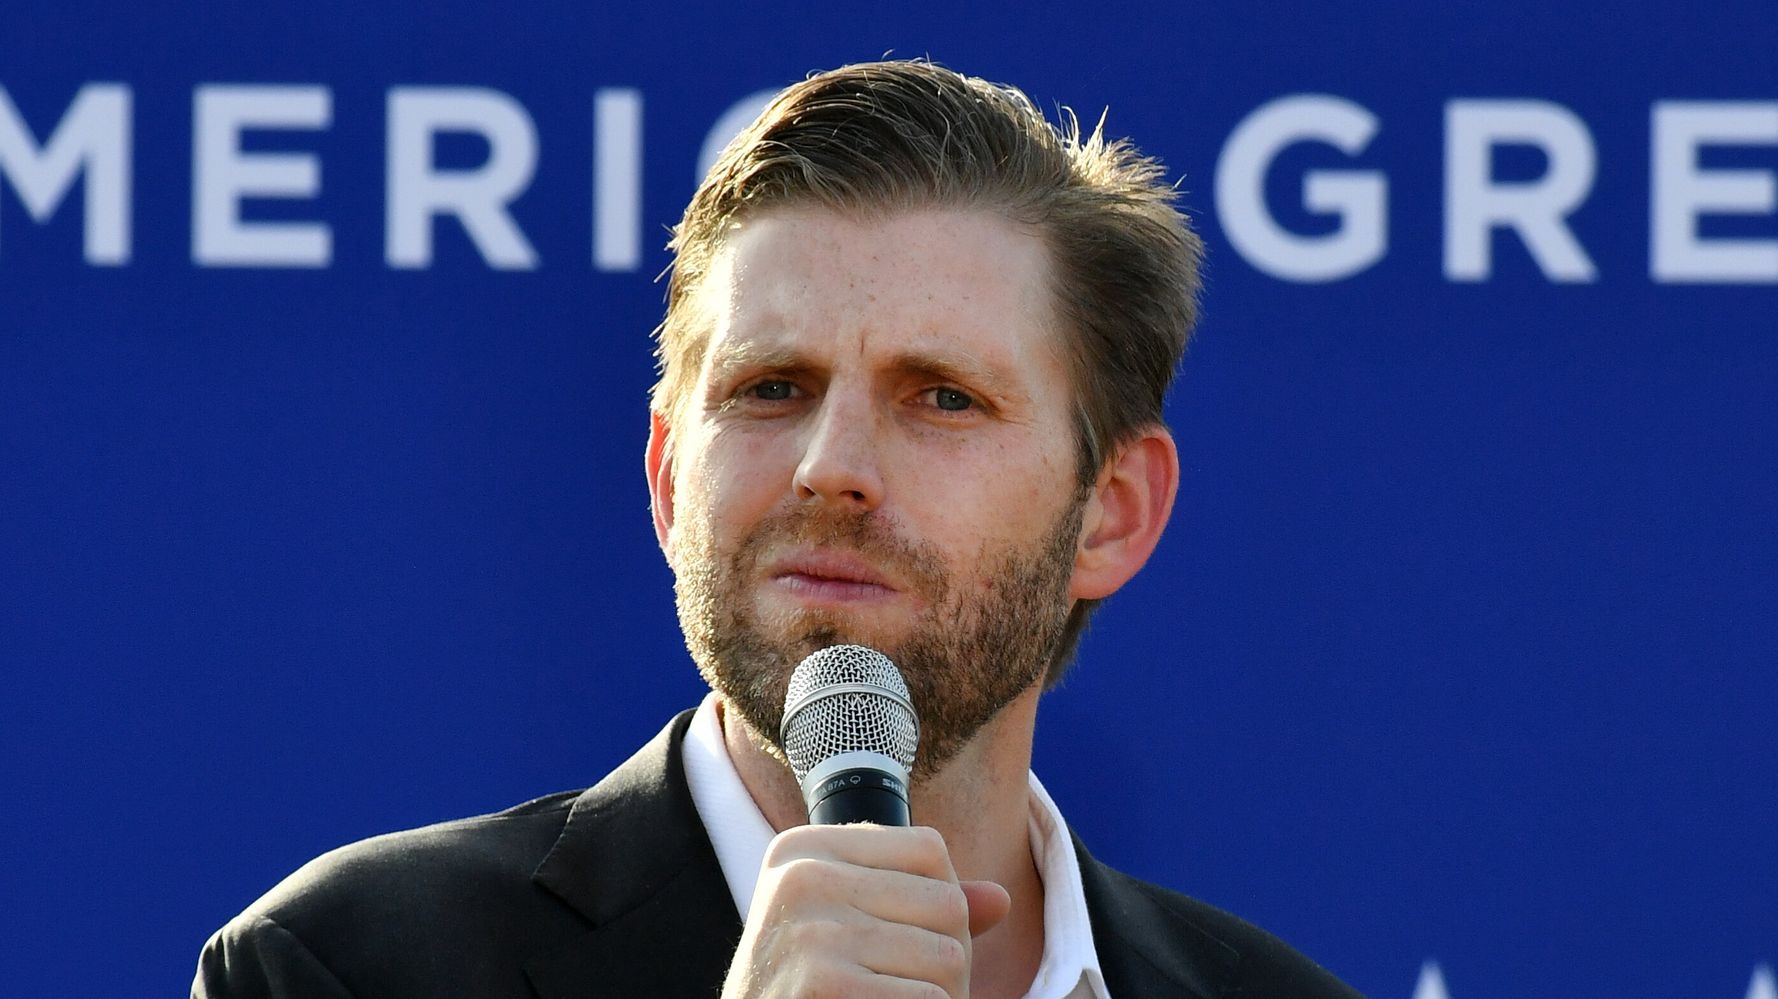 People Are Very Puzzled By Eric Trump’s ‘Pathetic' Second Gentleman Tweet